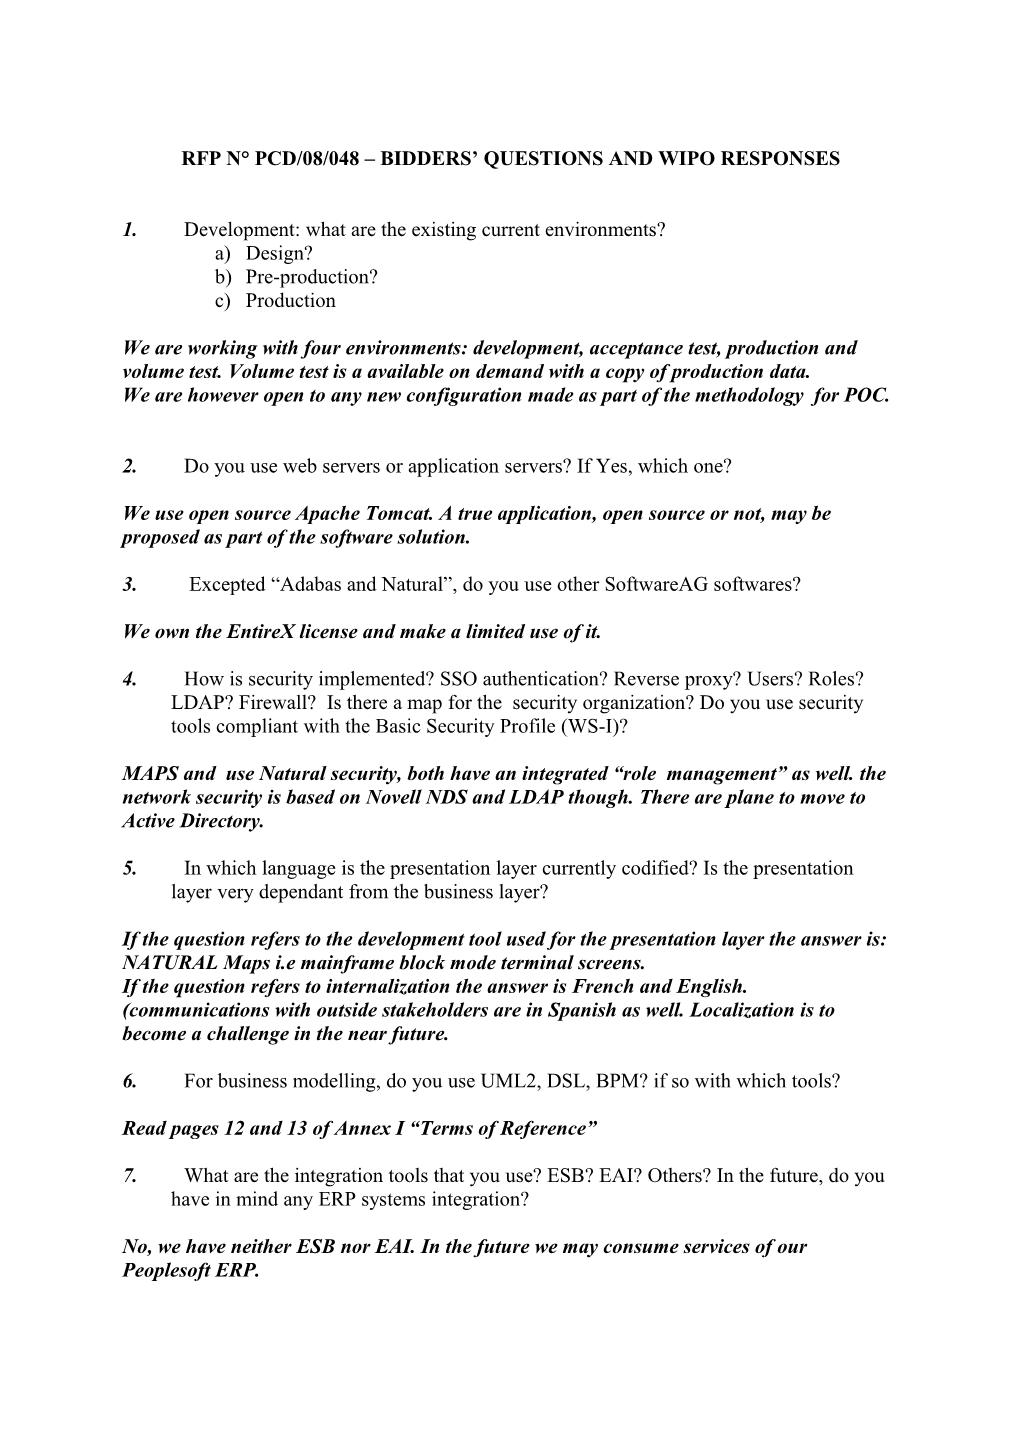 Rfp N Pcd/08/052 Bidders Questions and Wipo Responses